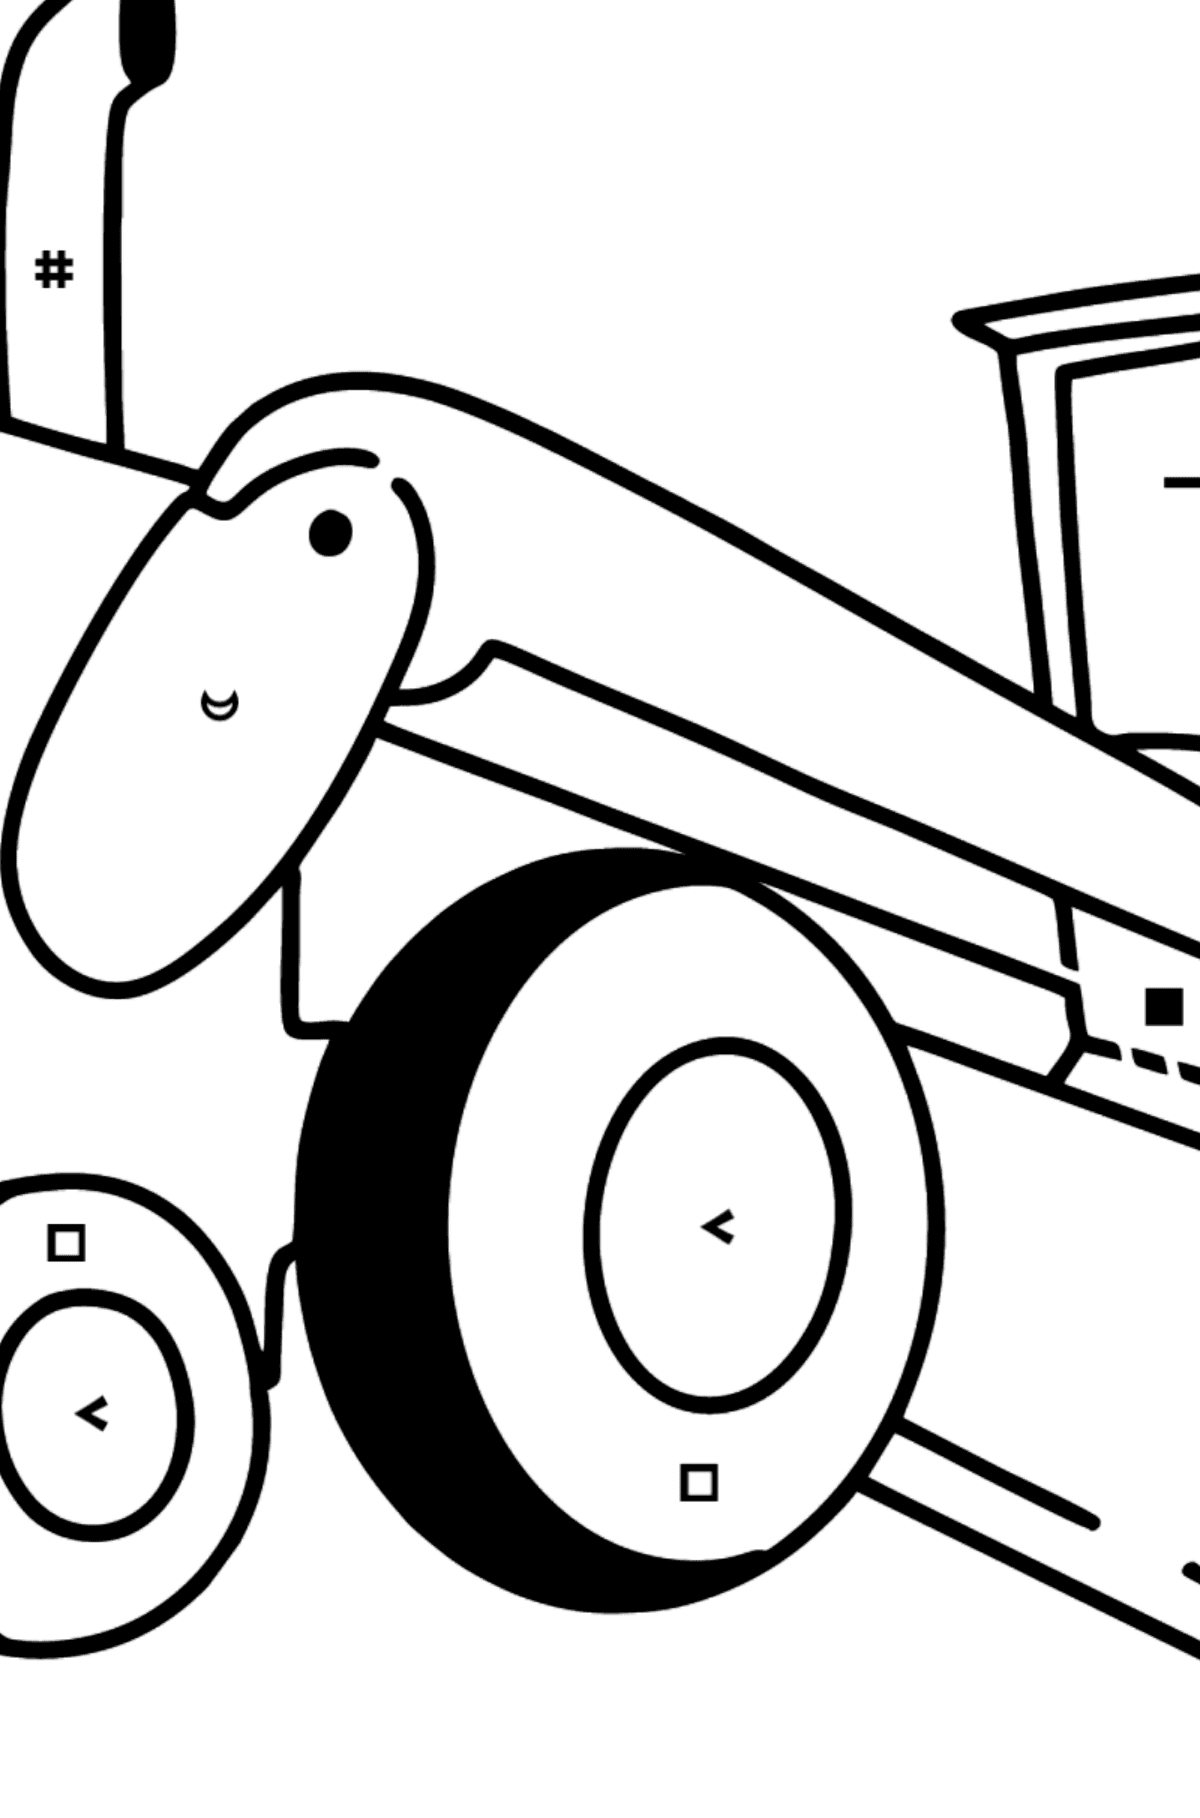 Tractor Grader coloring page - Coloring by Symbols for Kids